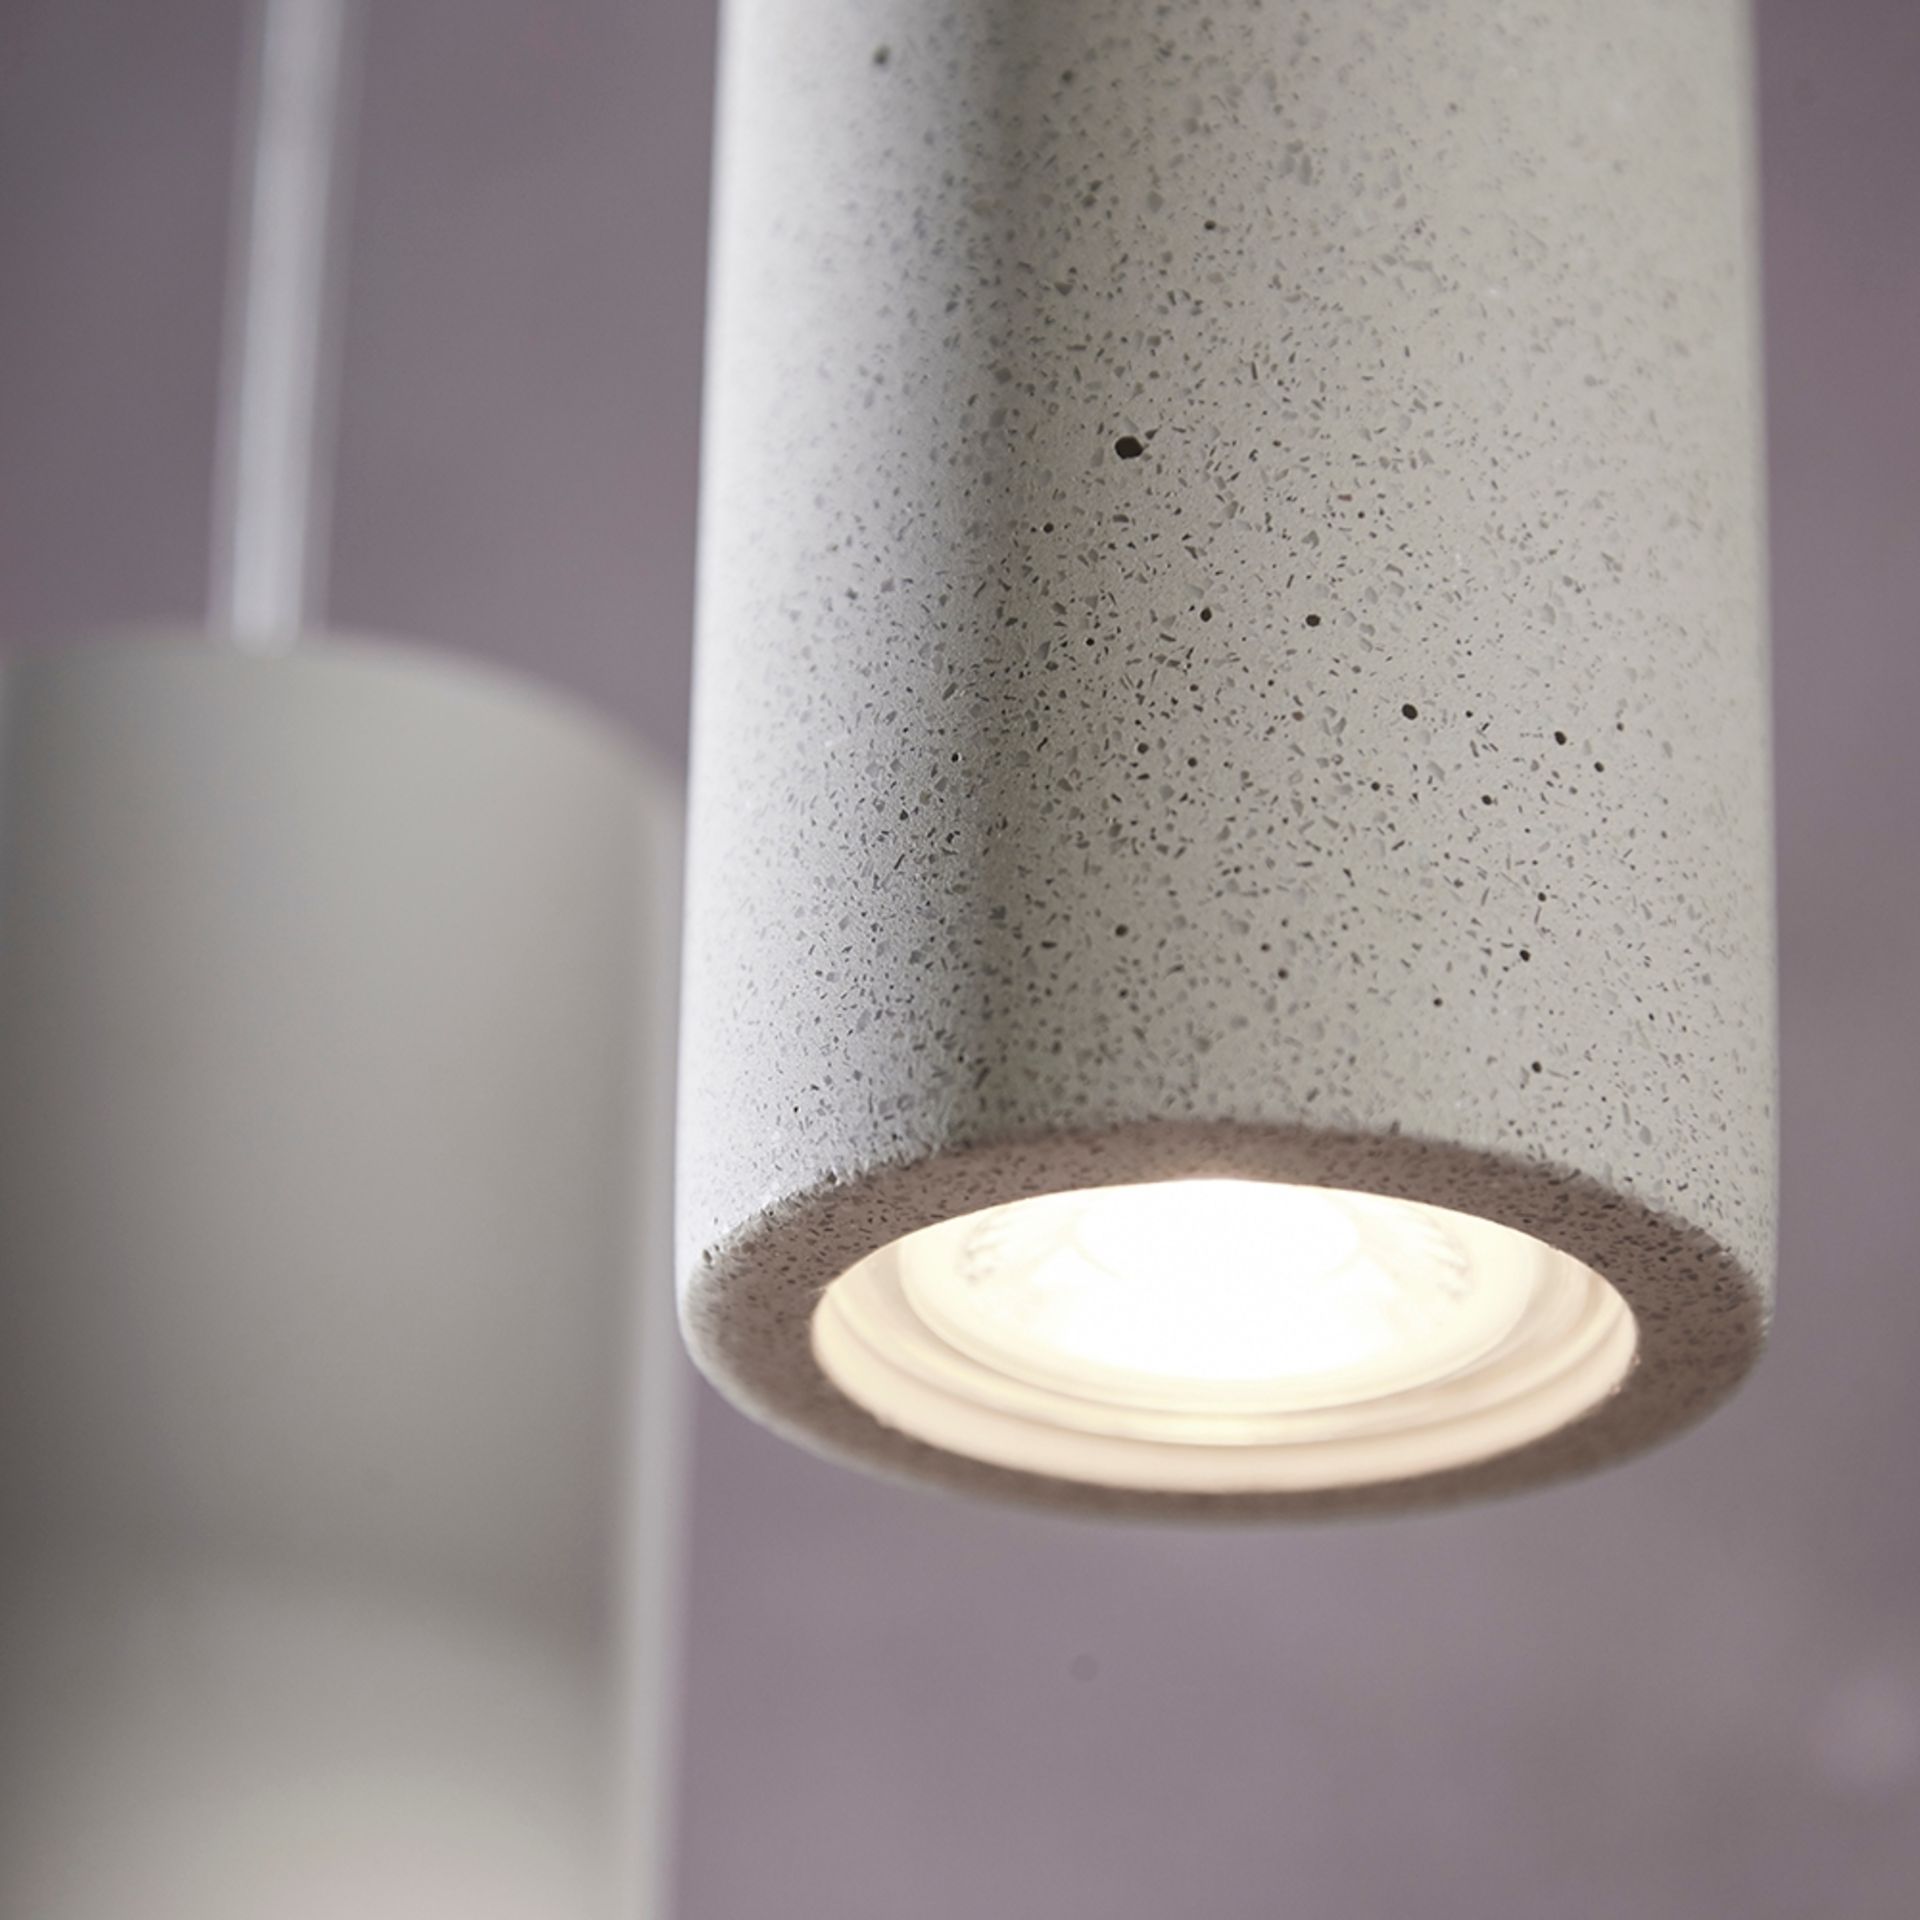 Endon Lighting Architectural inspired white sandstone concrete finish pendant, suspended from - Image 3 of 5